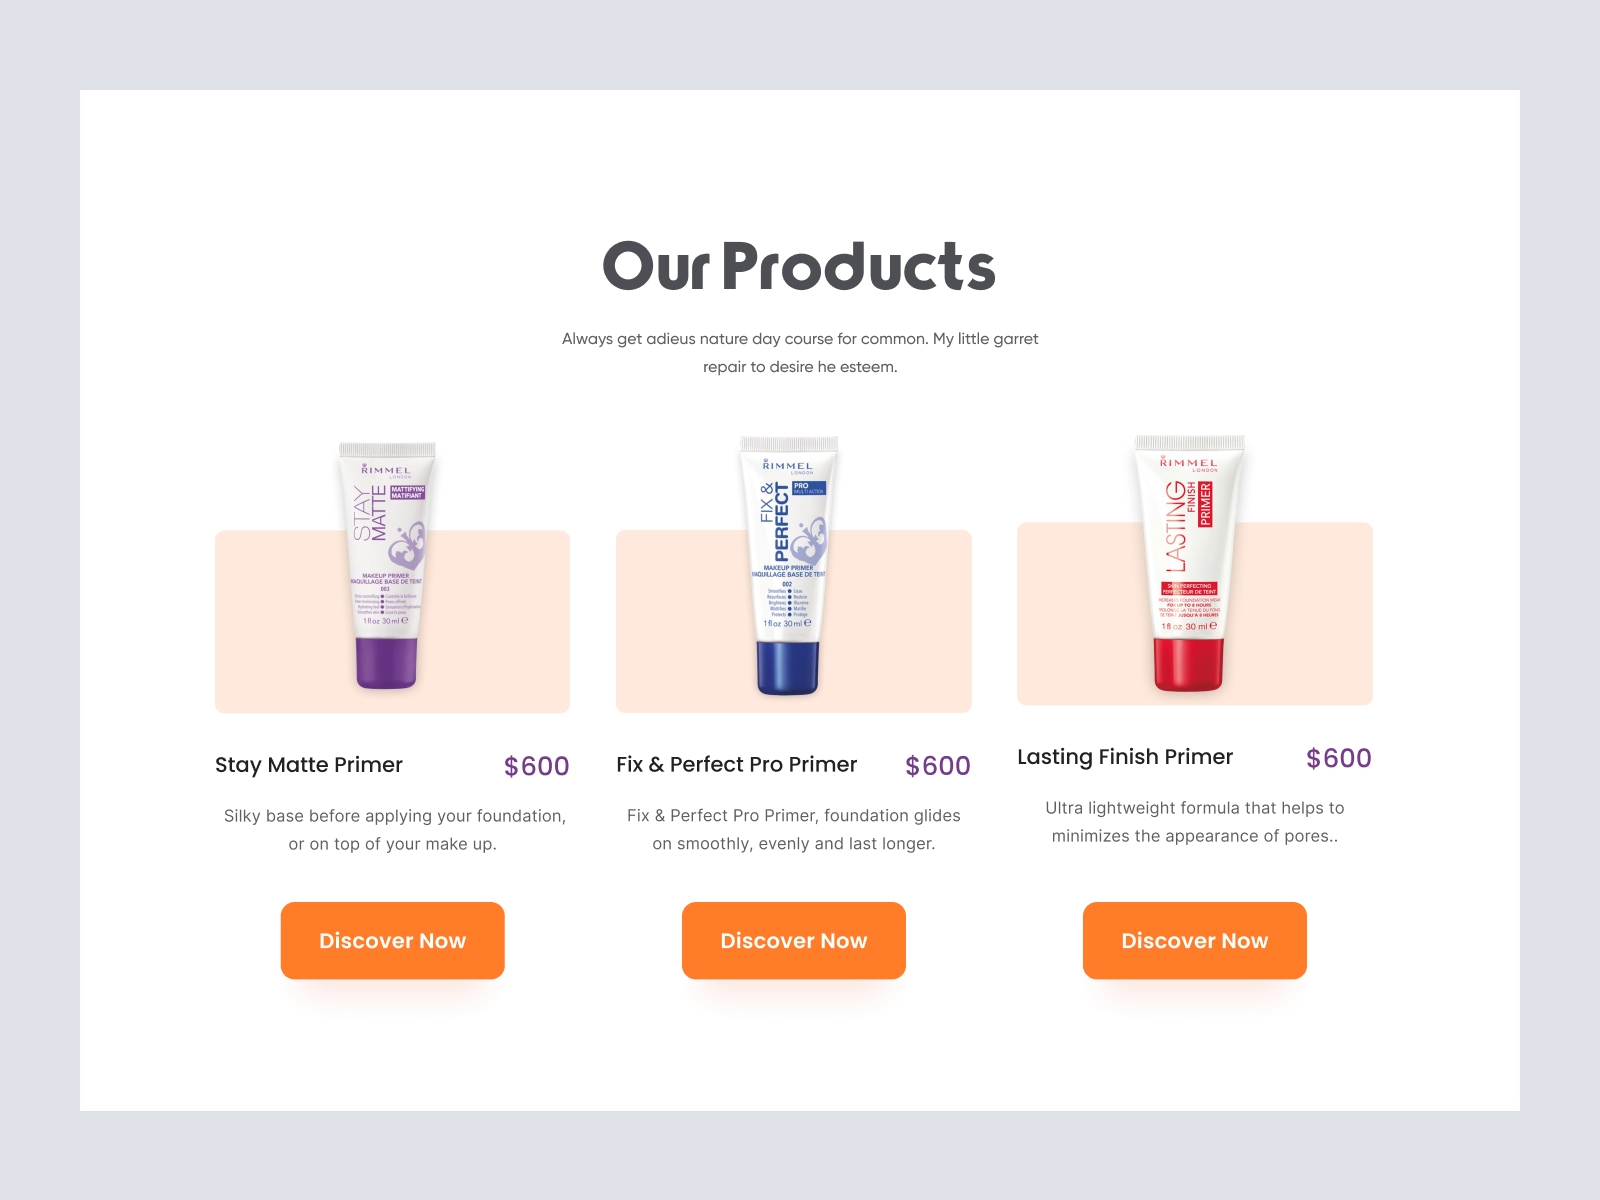 RIMMEL - Shopify Store Design for Cosmetics Products for Adobe XD - screen 3